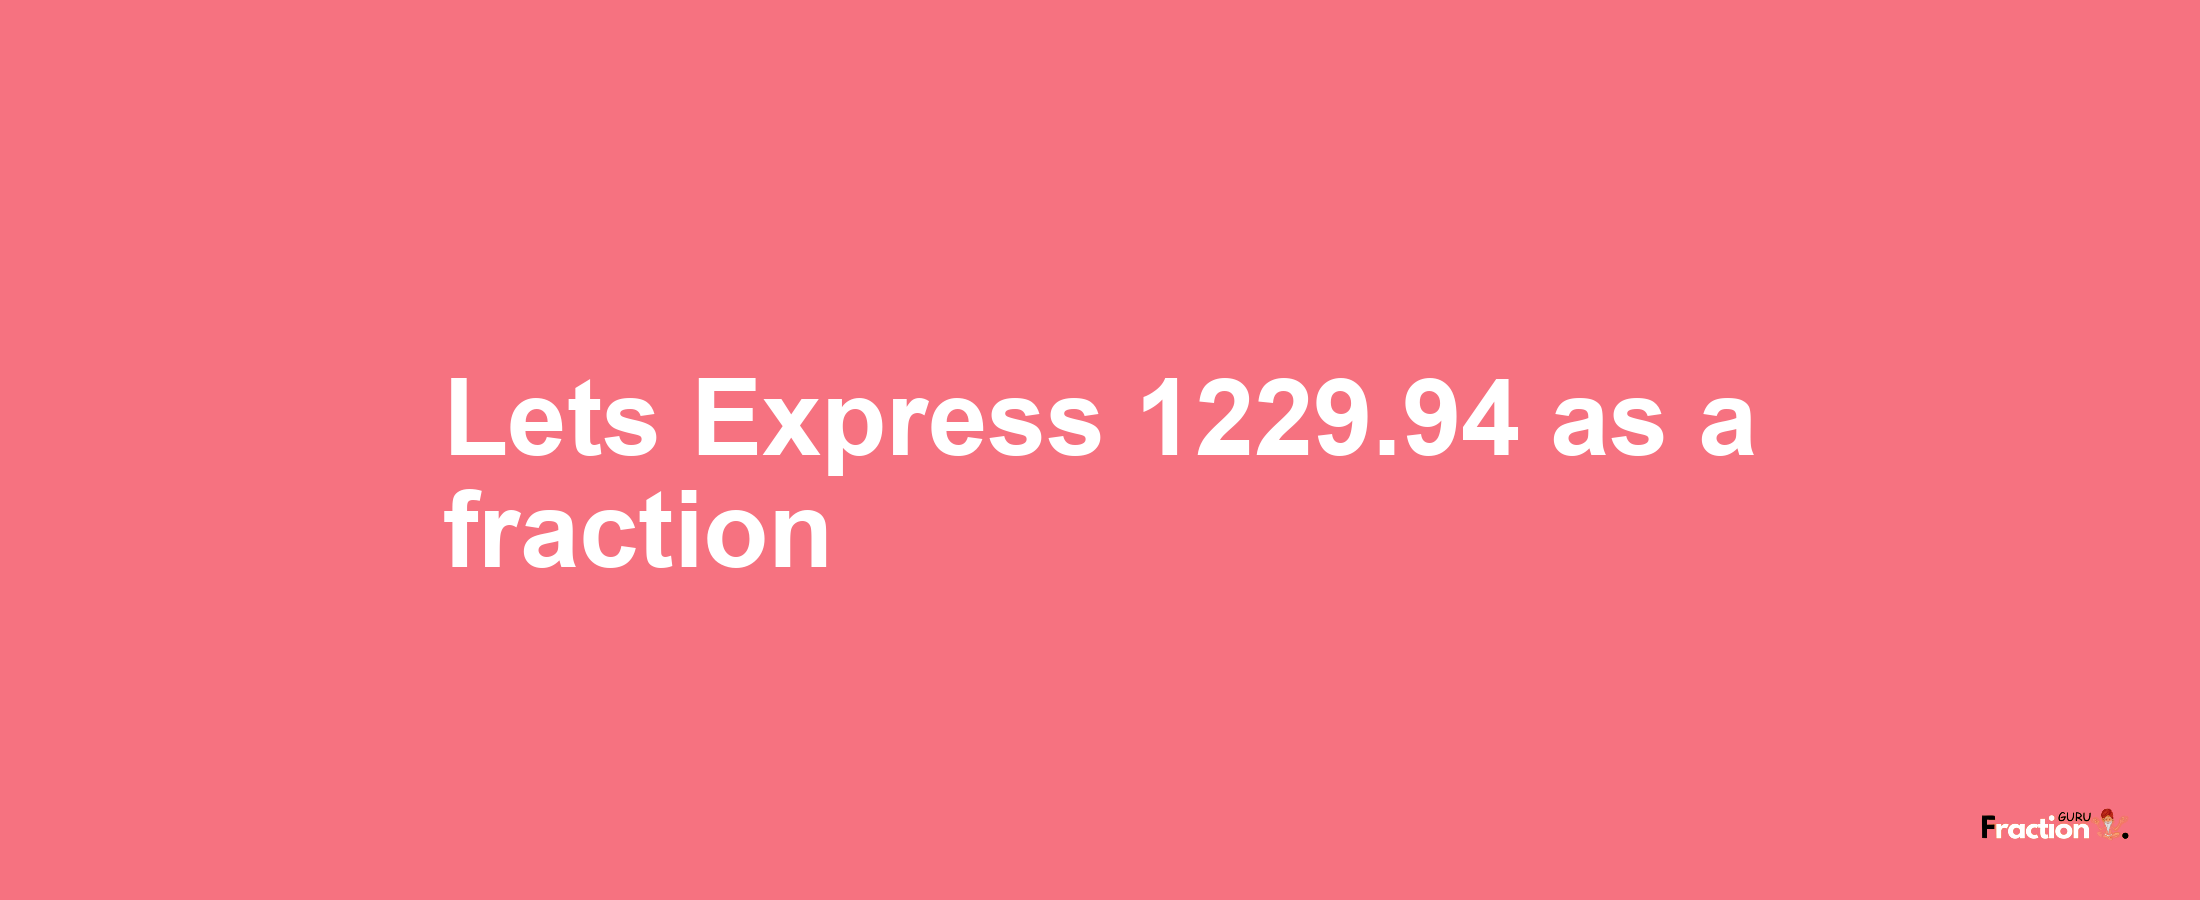 Lets Express 1229.94 as afraction